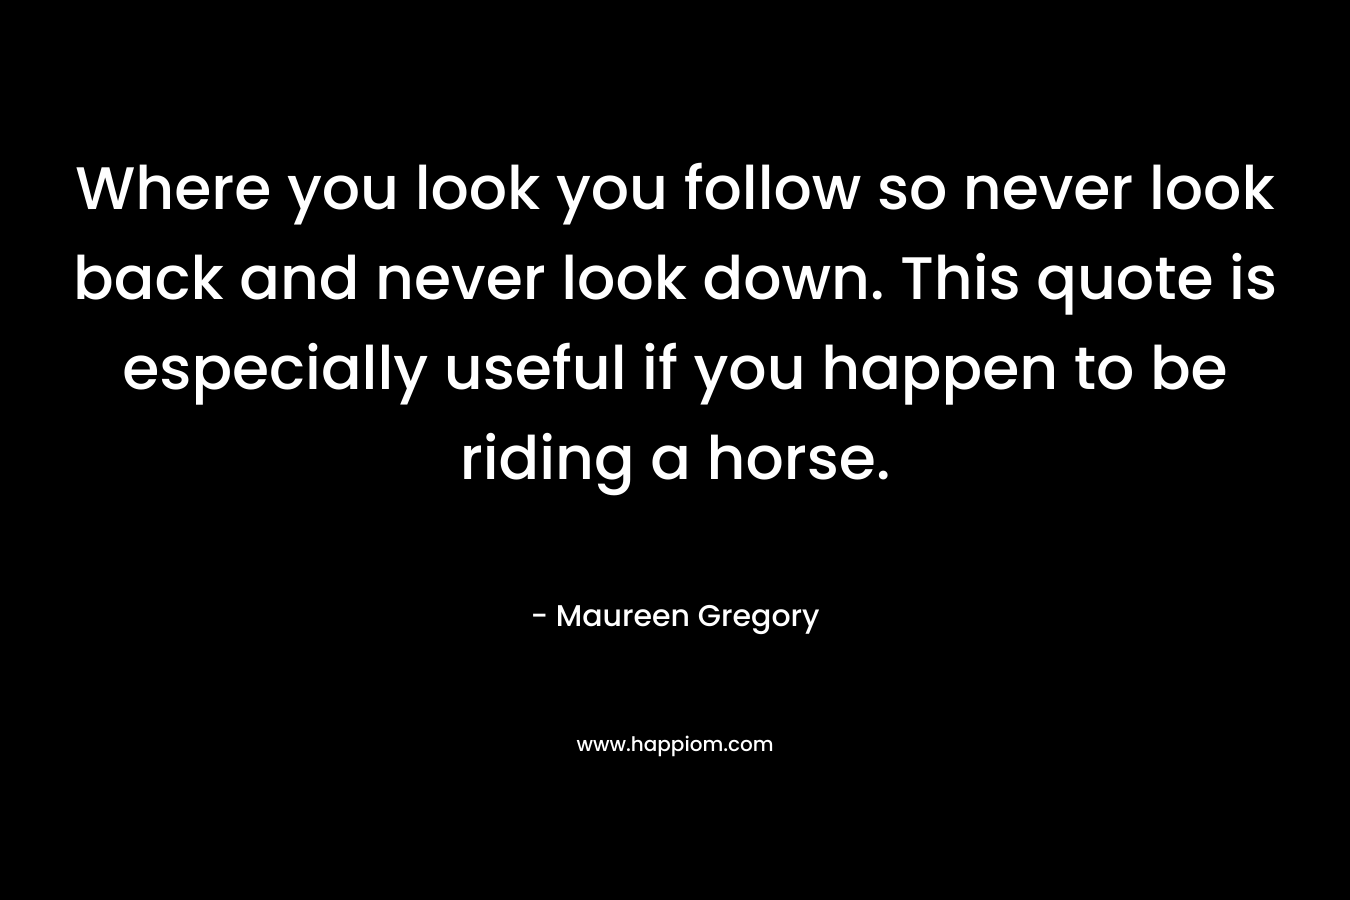 Where you look you follow so never look back and never look down. This quote is especially useful if you happen to be riding a horse.